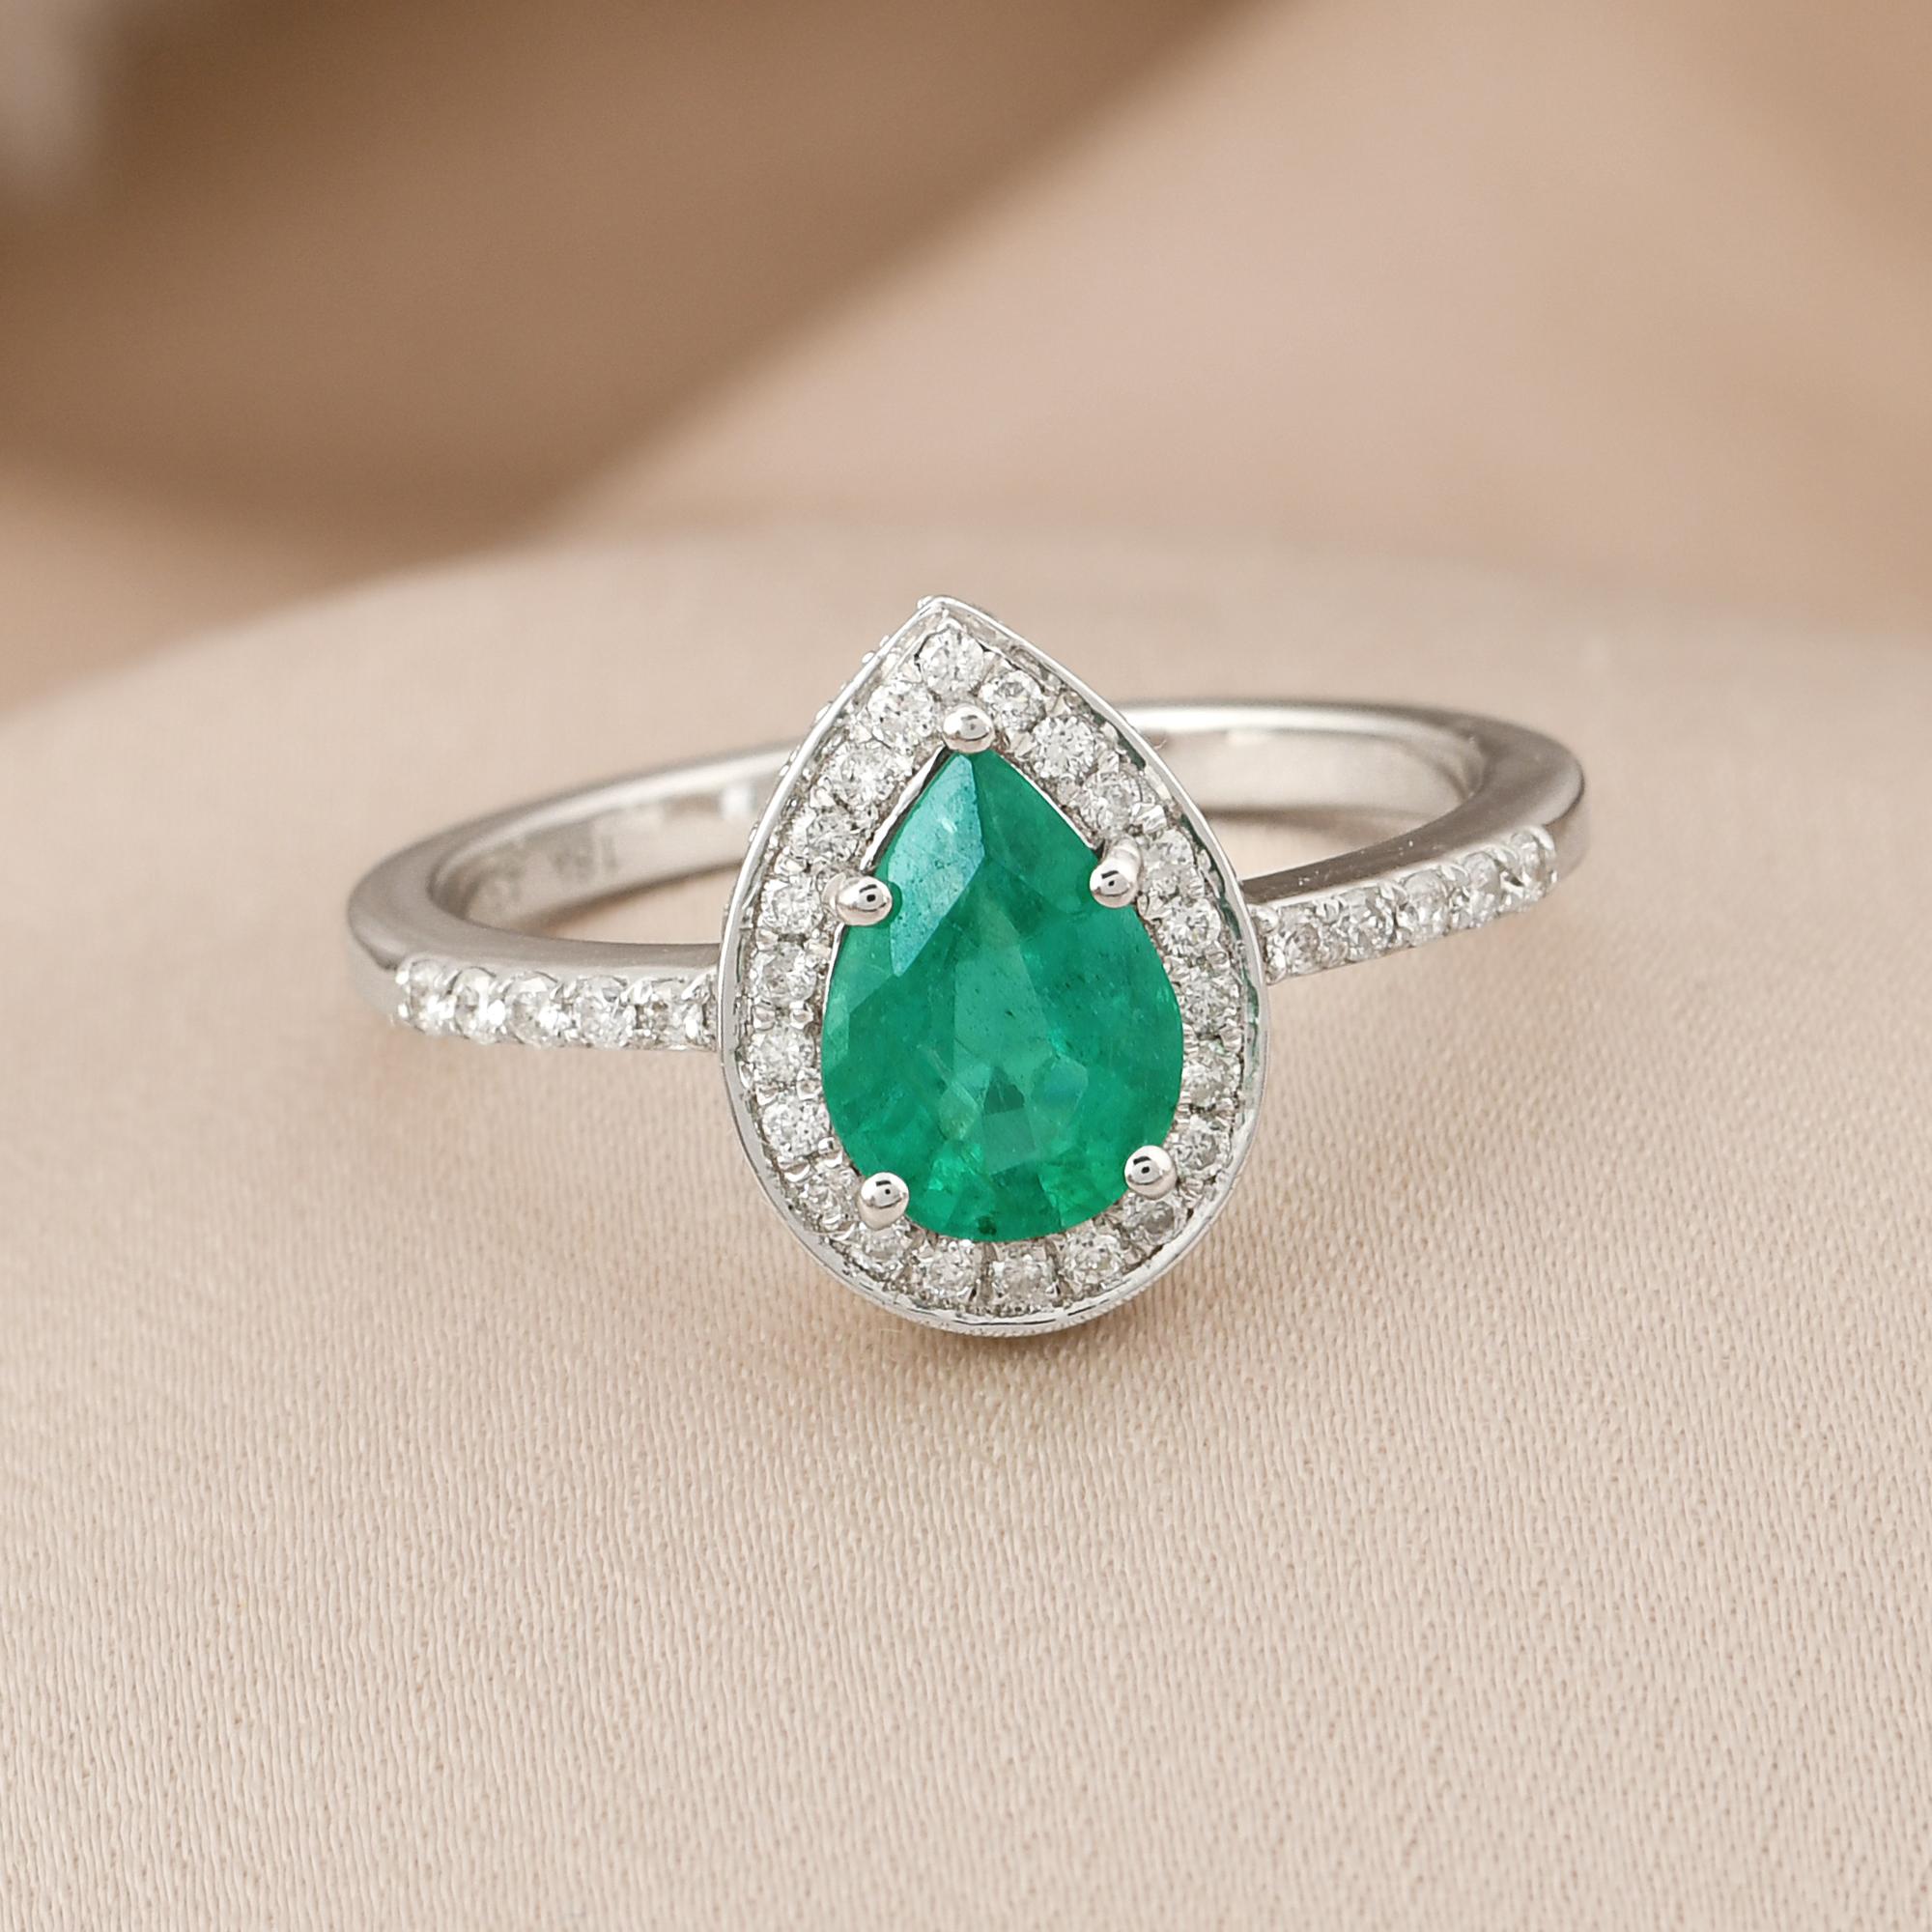 Pear Cut 1.40 Tcw Pear Natural Emerald Gemstone Halo Ring Diamond 18k White Gold Jewelry For Sale